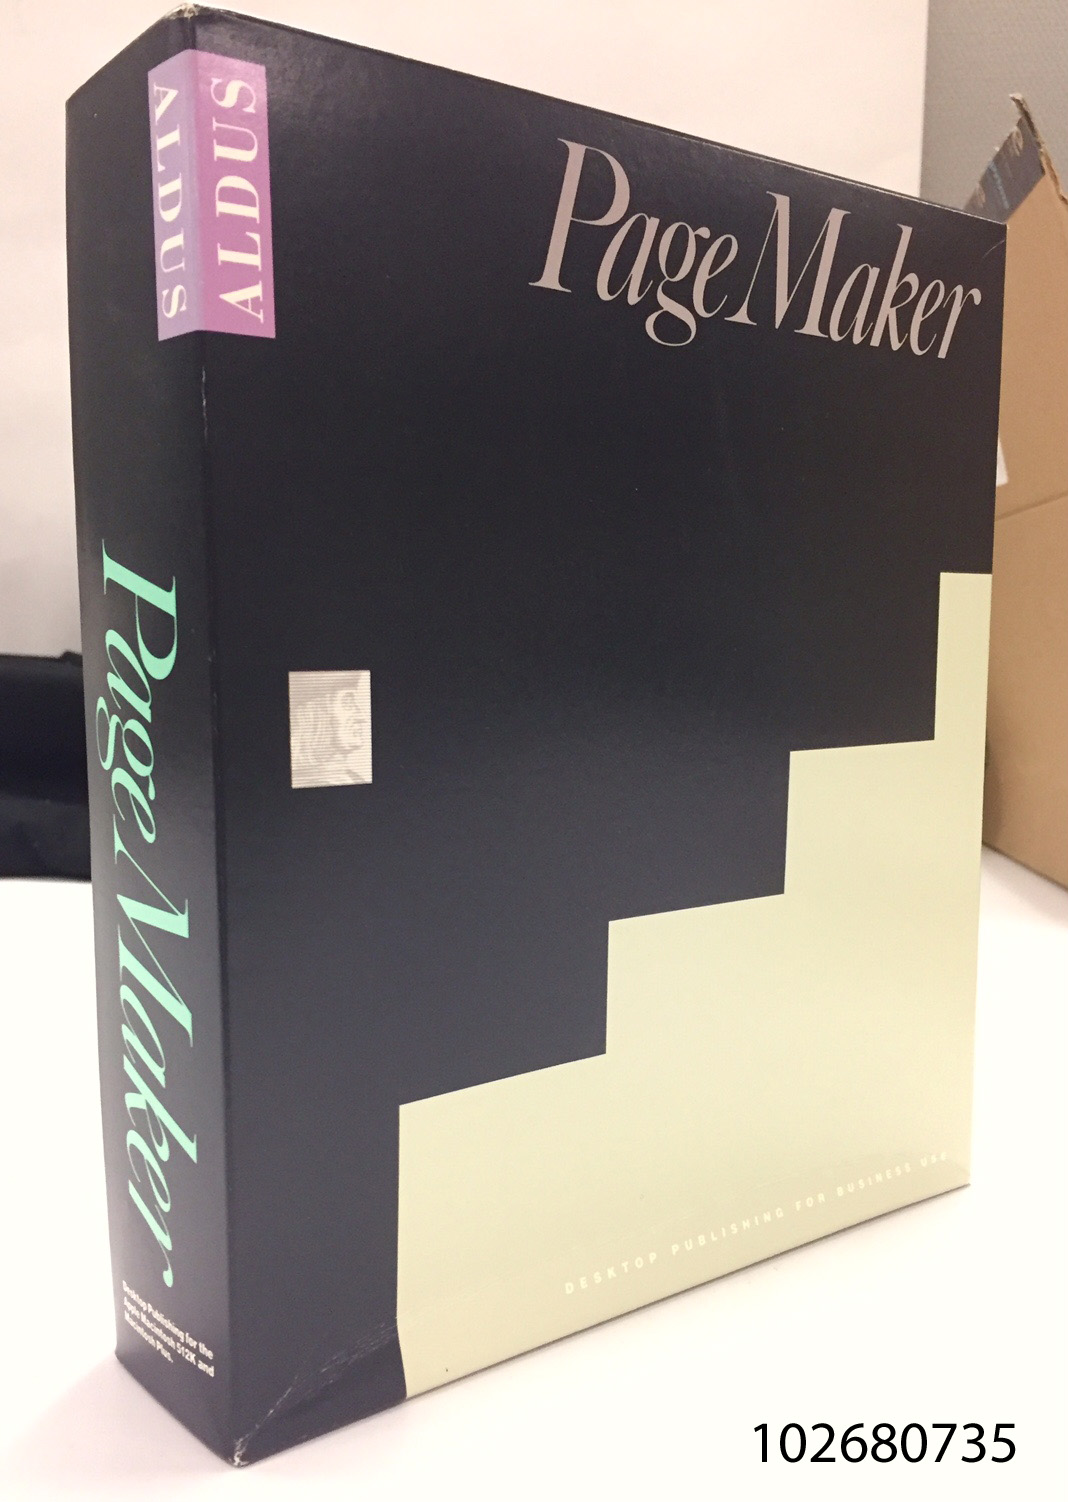 Pagemaker for macbook air